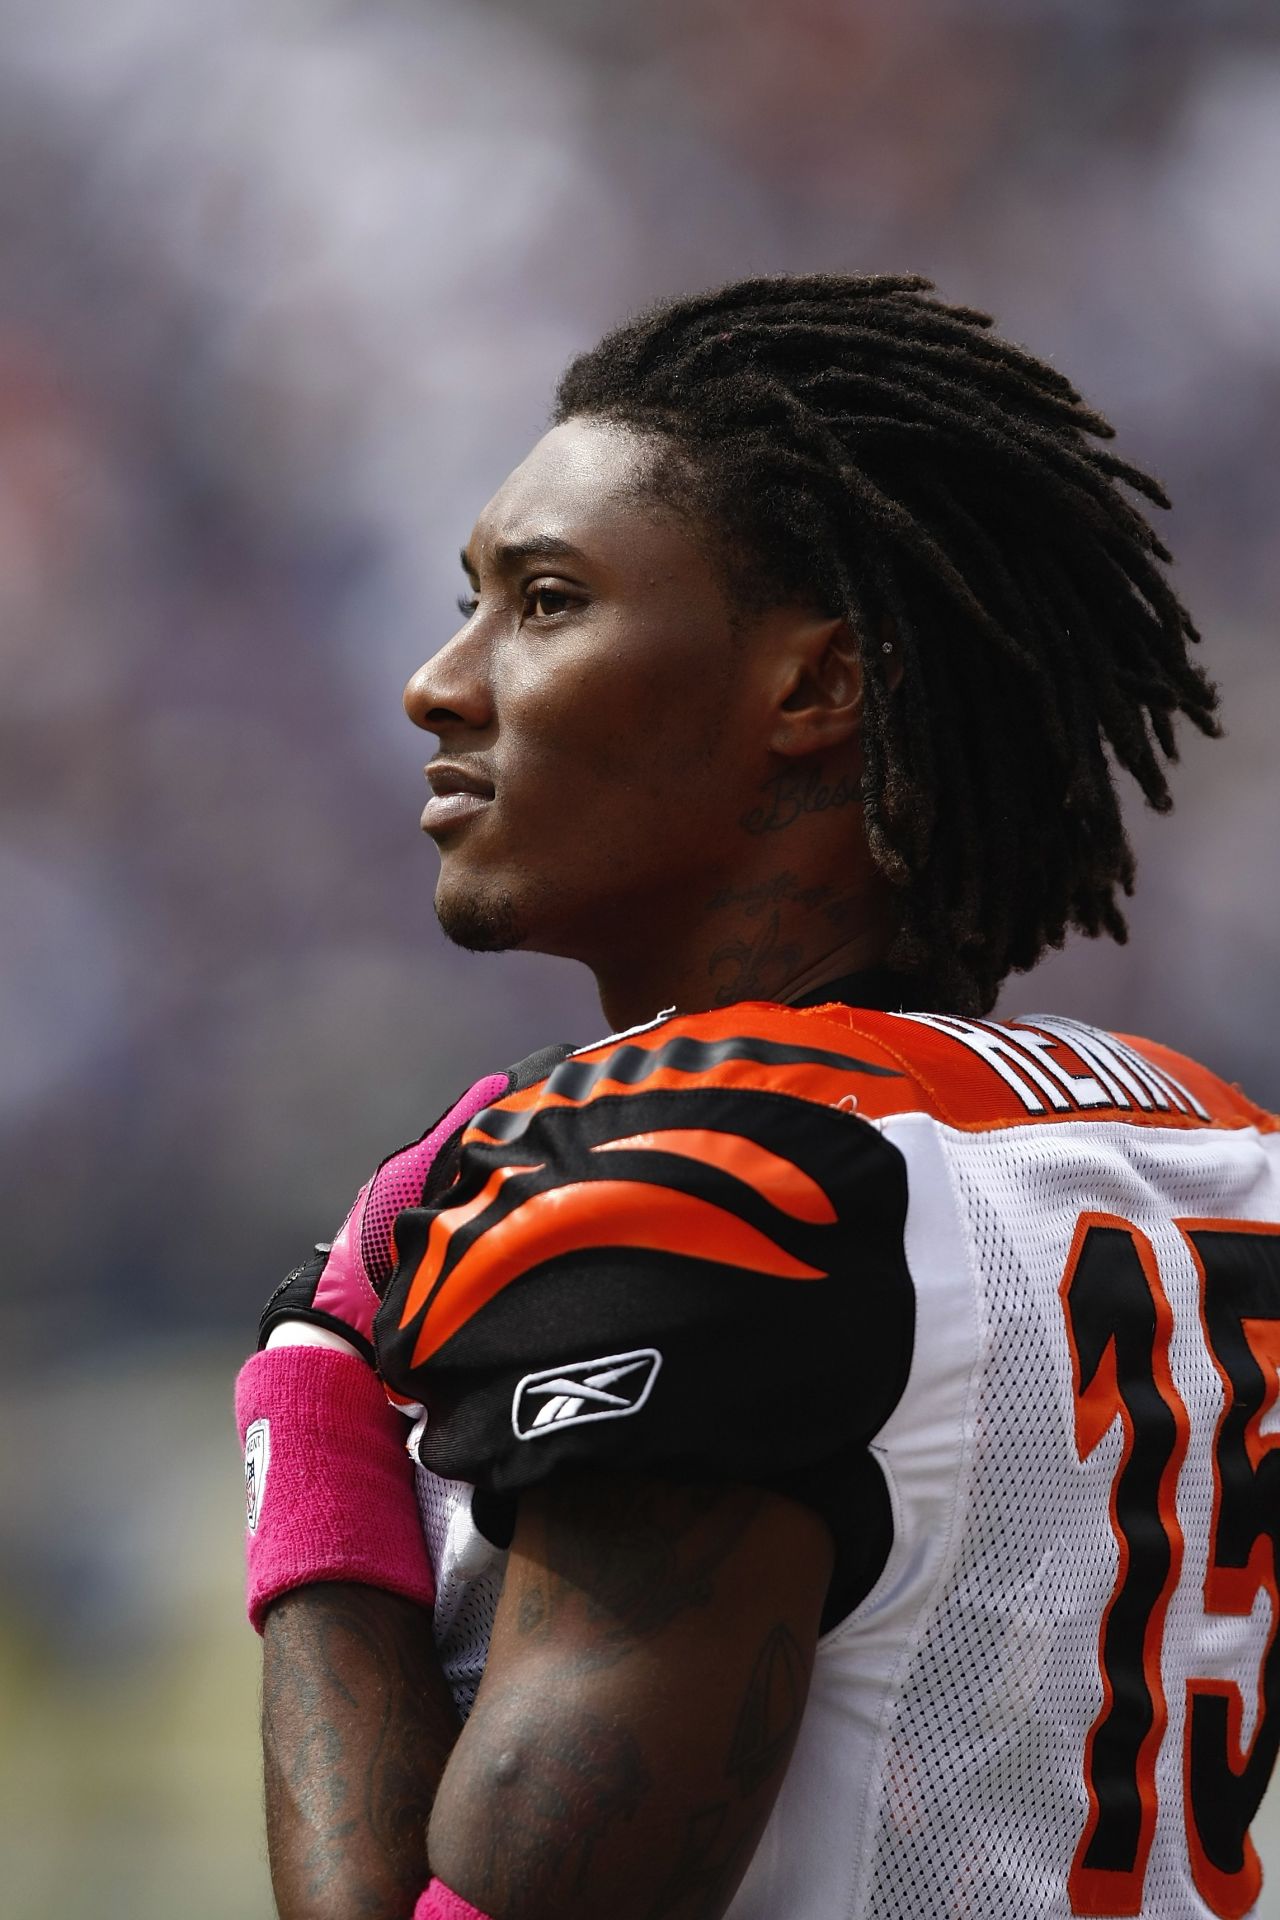 Chris Henry played five seasons for the Cincinnati Bengals before dying at the age of 26. <a href="http://www.cnn.com/2010/HEALTH/07/02/brain.damage.henry/index.html" target="_blank">He died after falling from the bed of a moving pickup</a> during a fight with his fiancée. His young age prompted concern over how quickly athletes start to suffer from CTE.